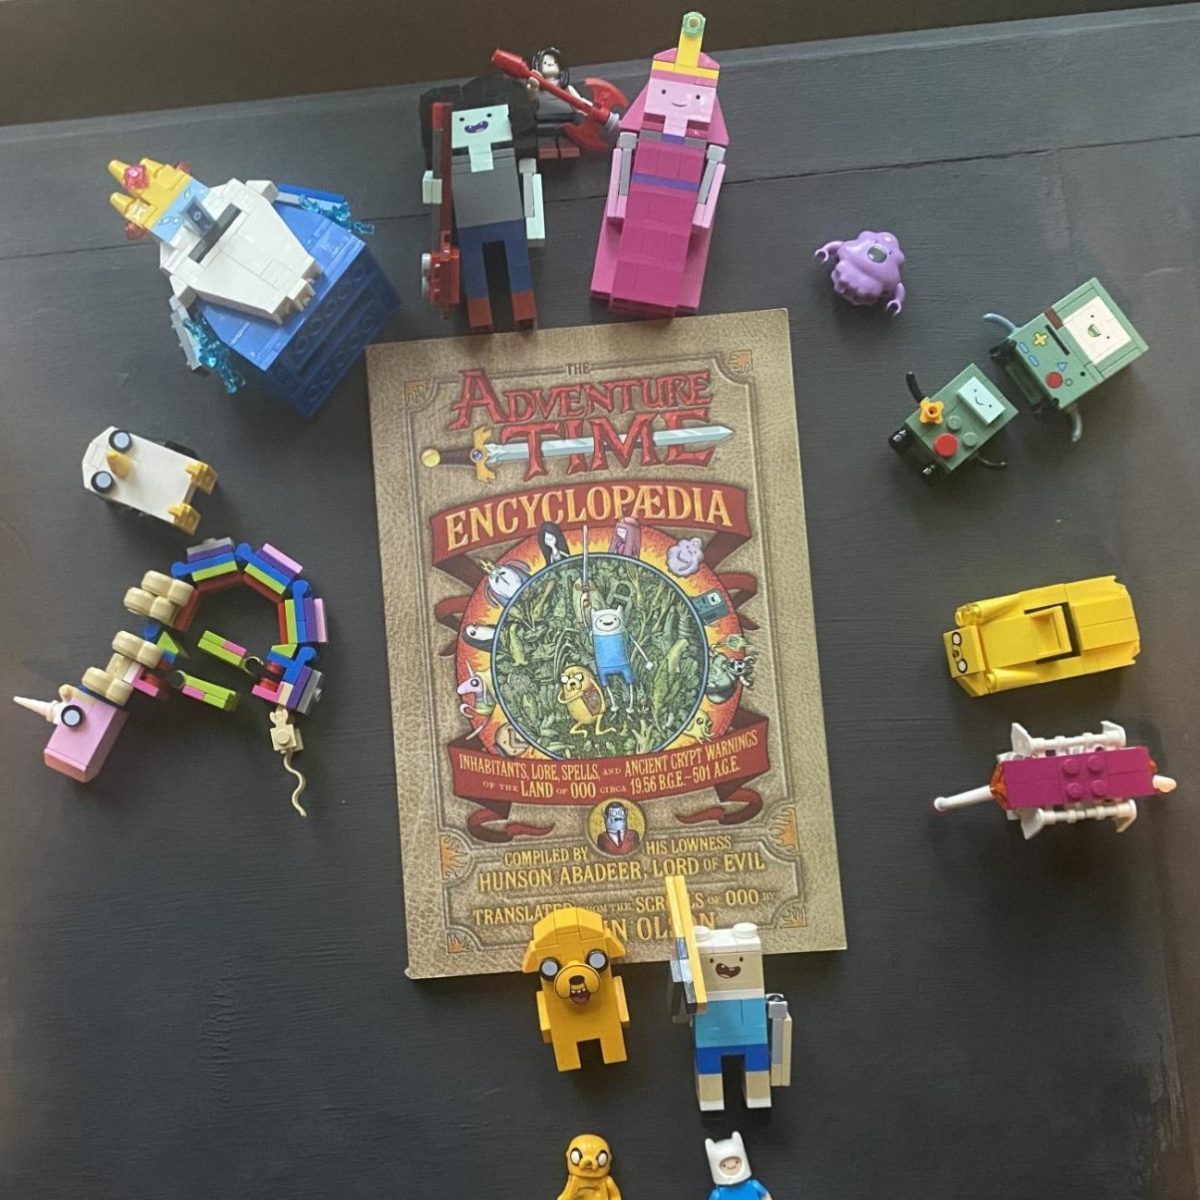 Some of the Adventure Time merchandise owned by Opinion Editor Brian Keim.